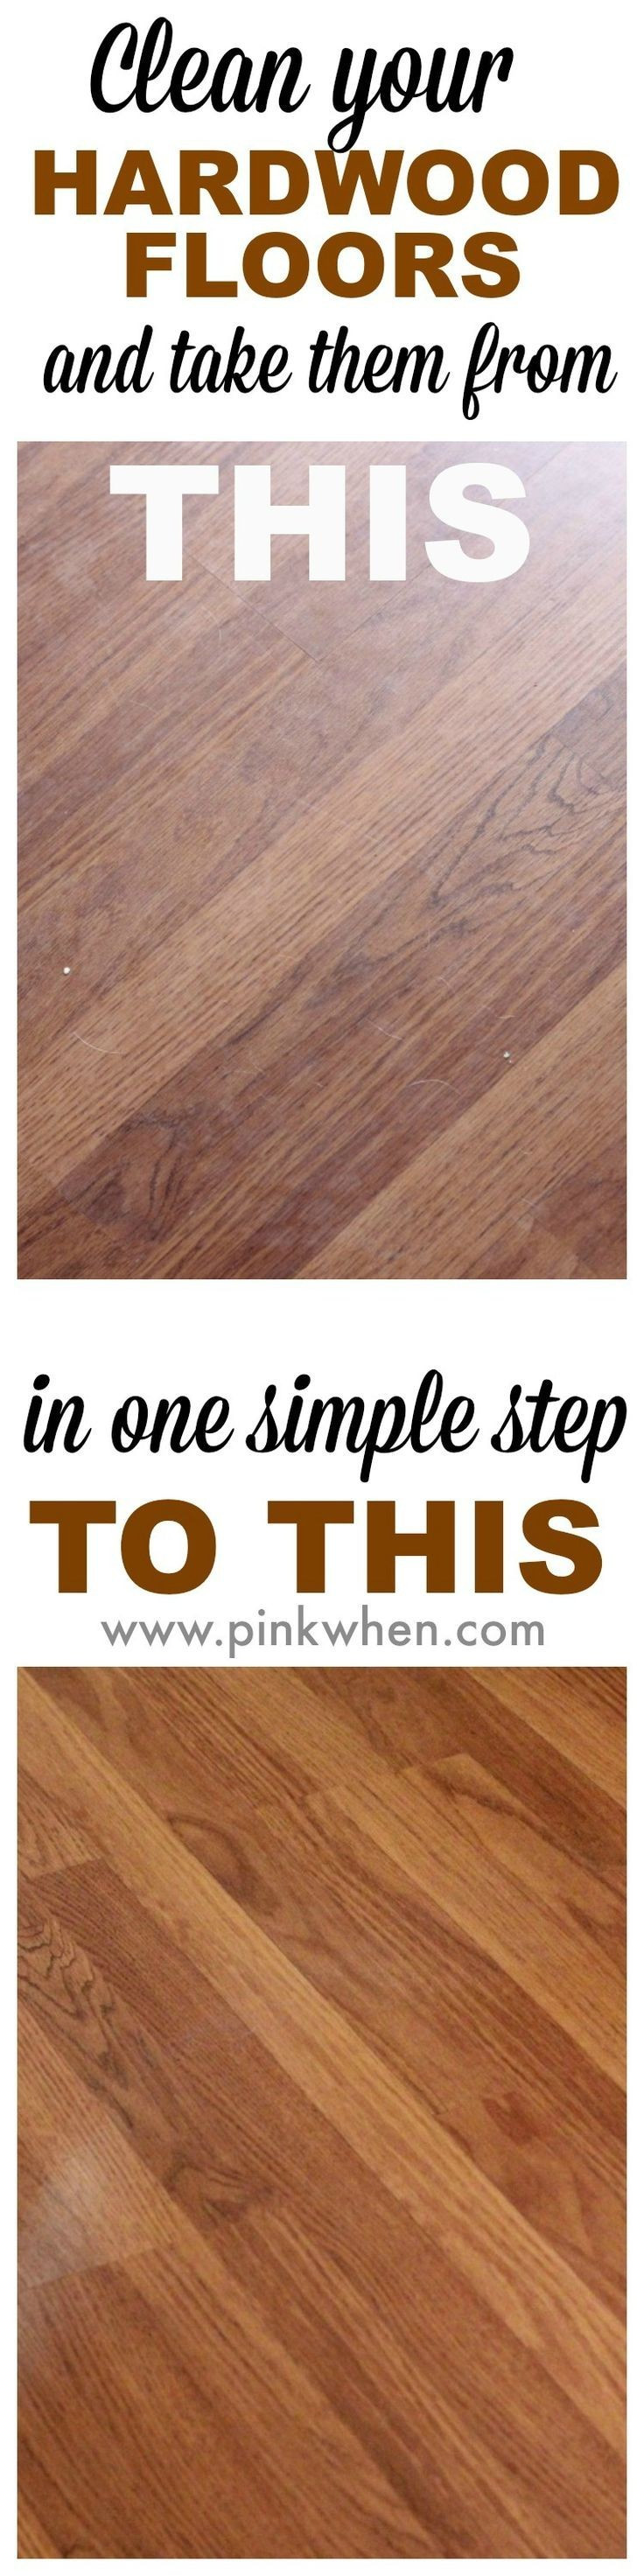 22 Lovely Can You Use Hardwood Floor Cleaner On Laminate 2024 free download can you use hardwood floor cleaner on laminate of 17 awesome what to use to clean hardwood floors image dizpos com with what to use to clean hardwood floors awesome what do you clean hardwoo